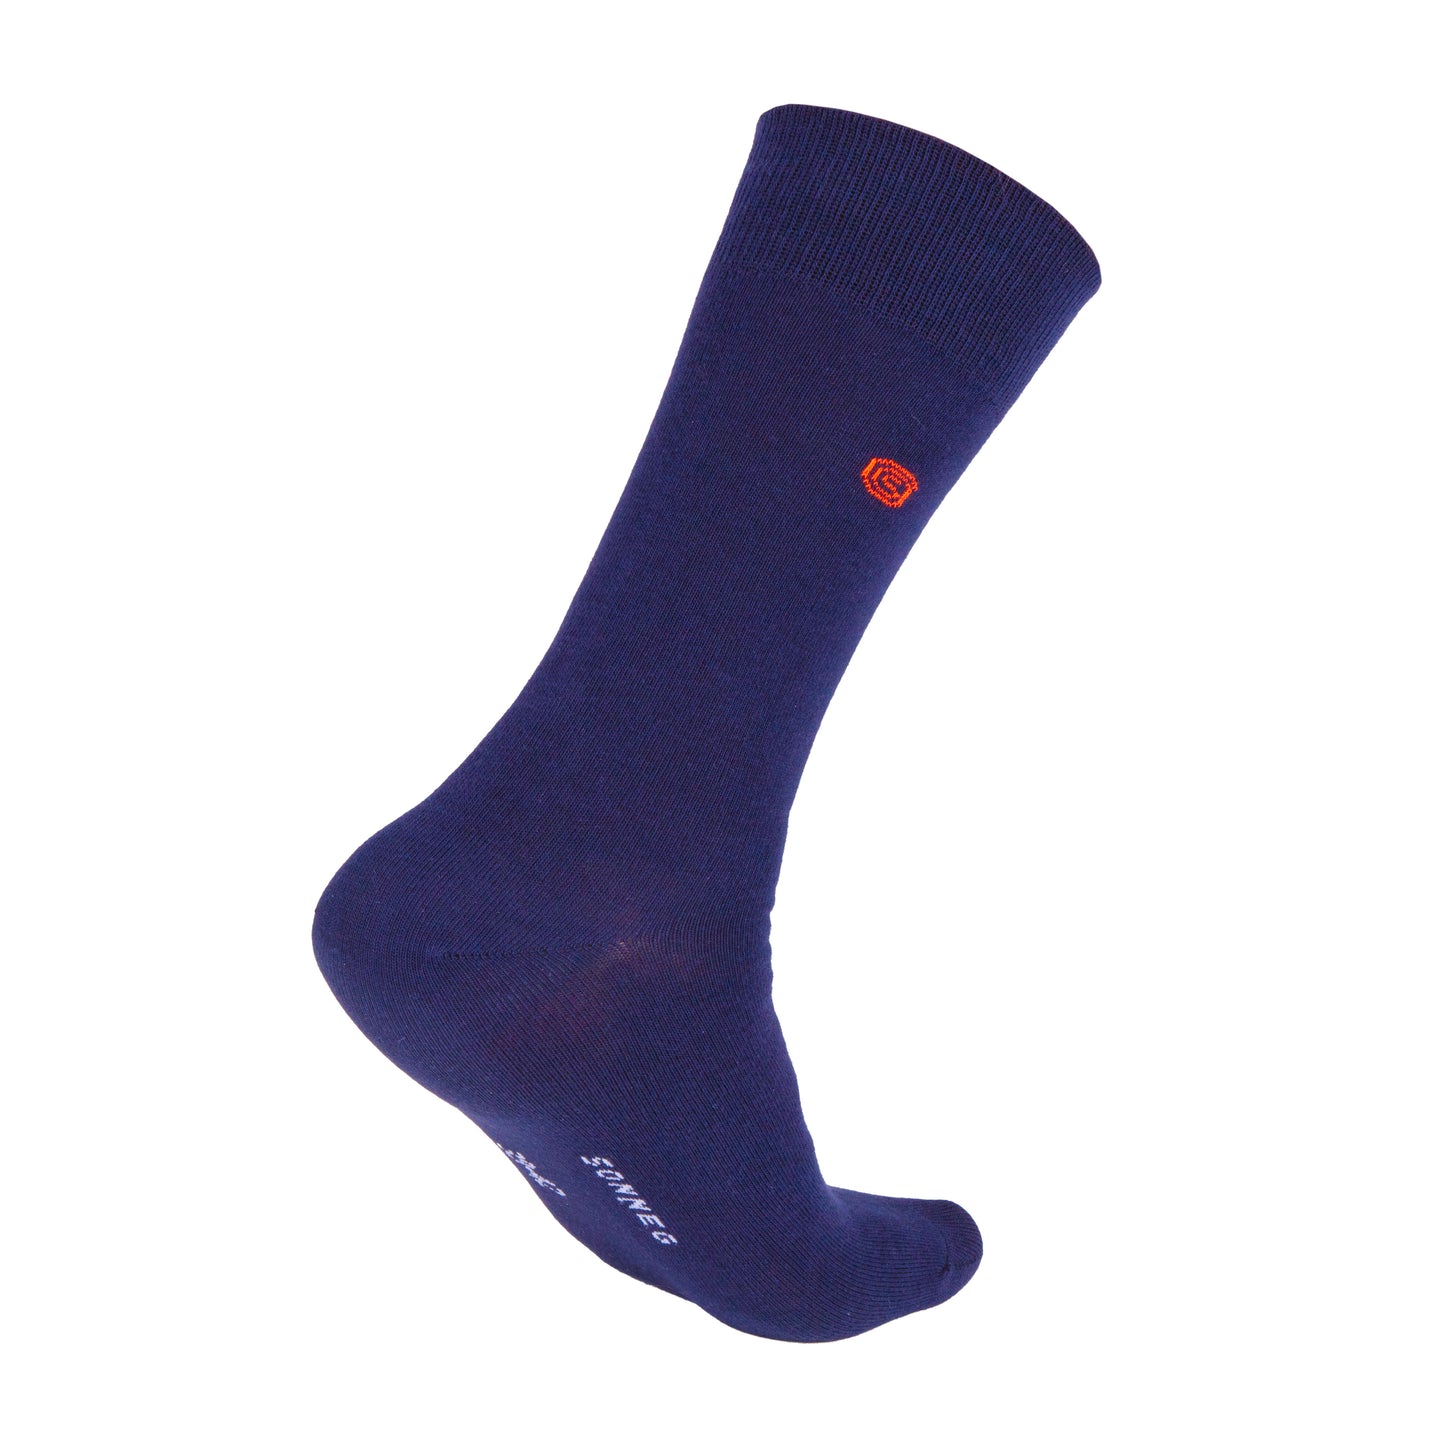 Royal blue high, business, classic, crew length socks – 3 or 6 pairs pack